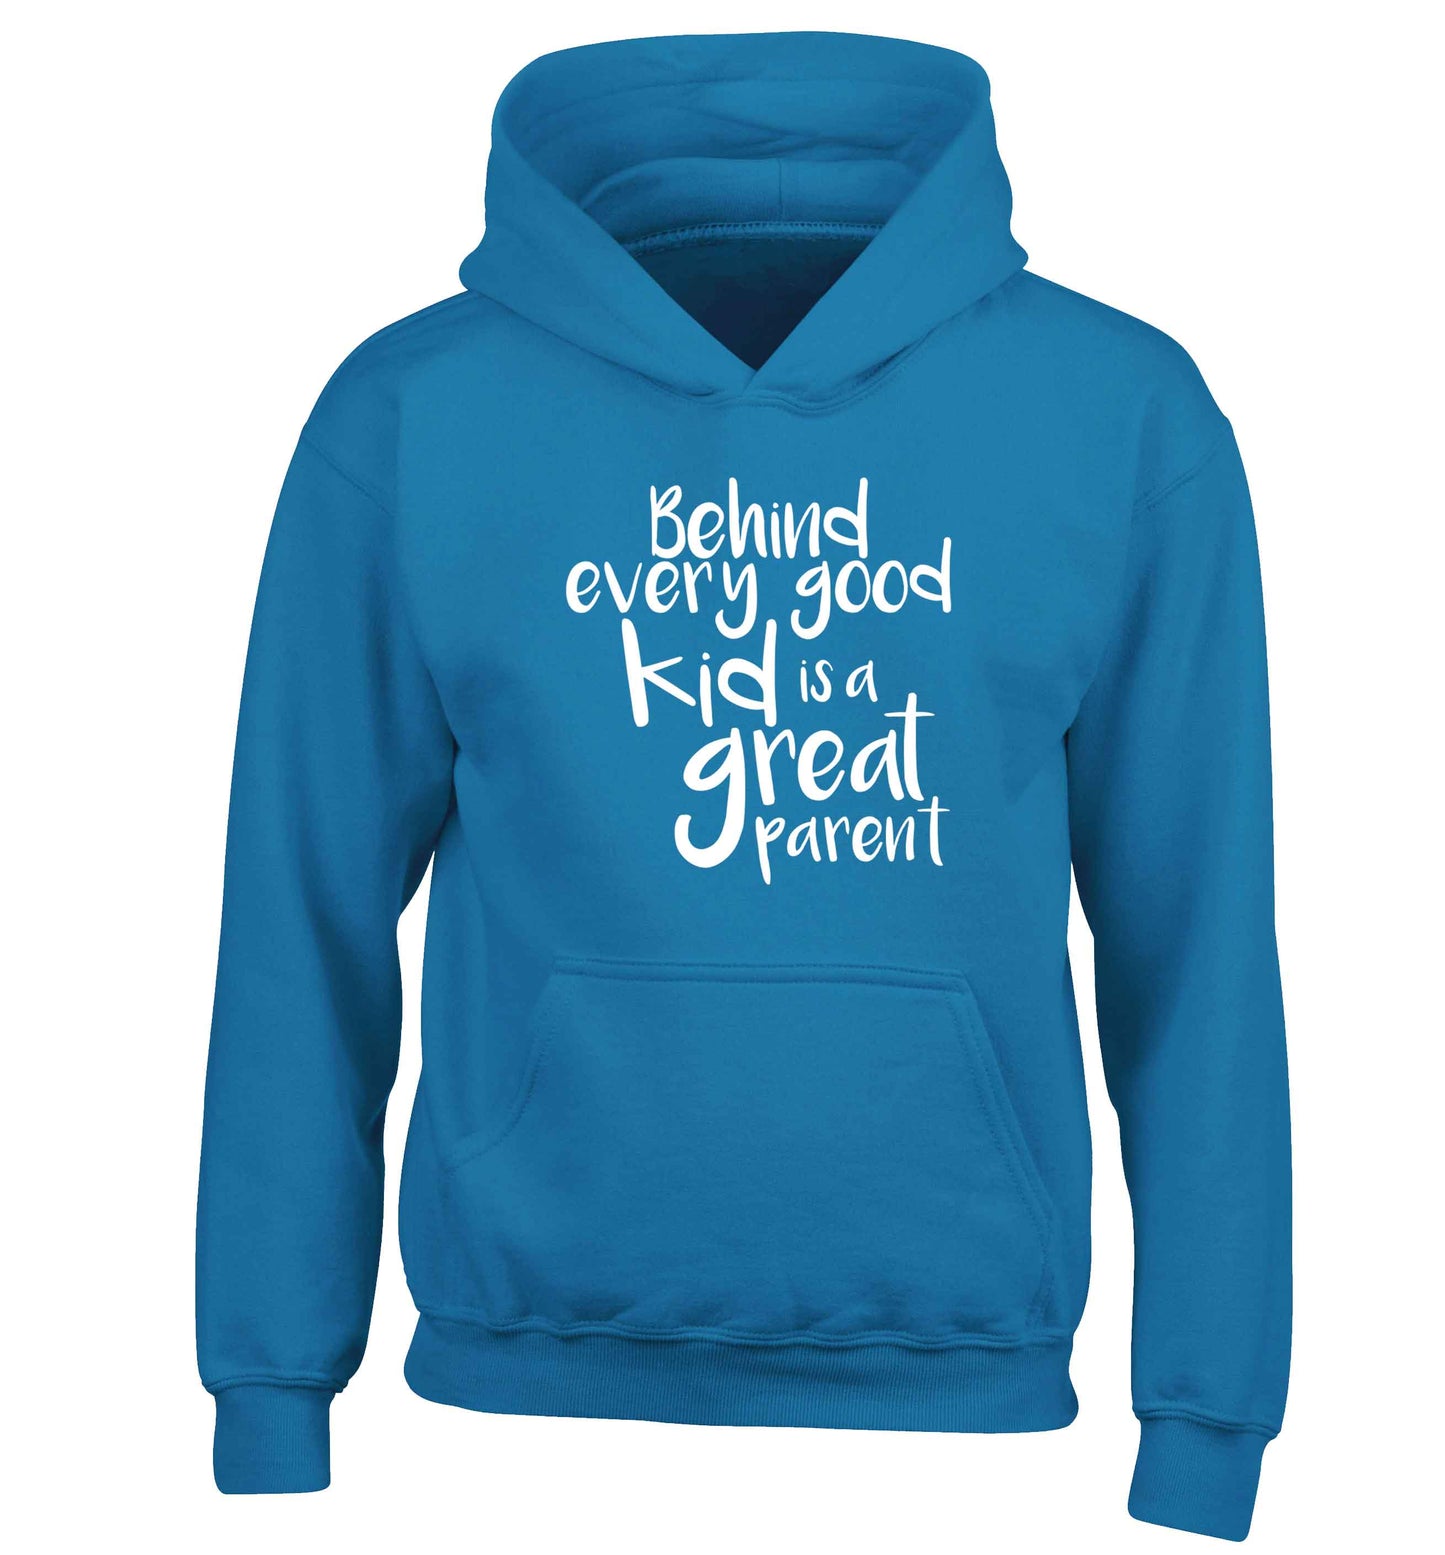 Behind every good kid is a great parent children's blue hoodie 12-13 Years